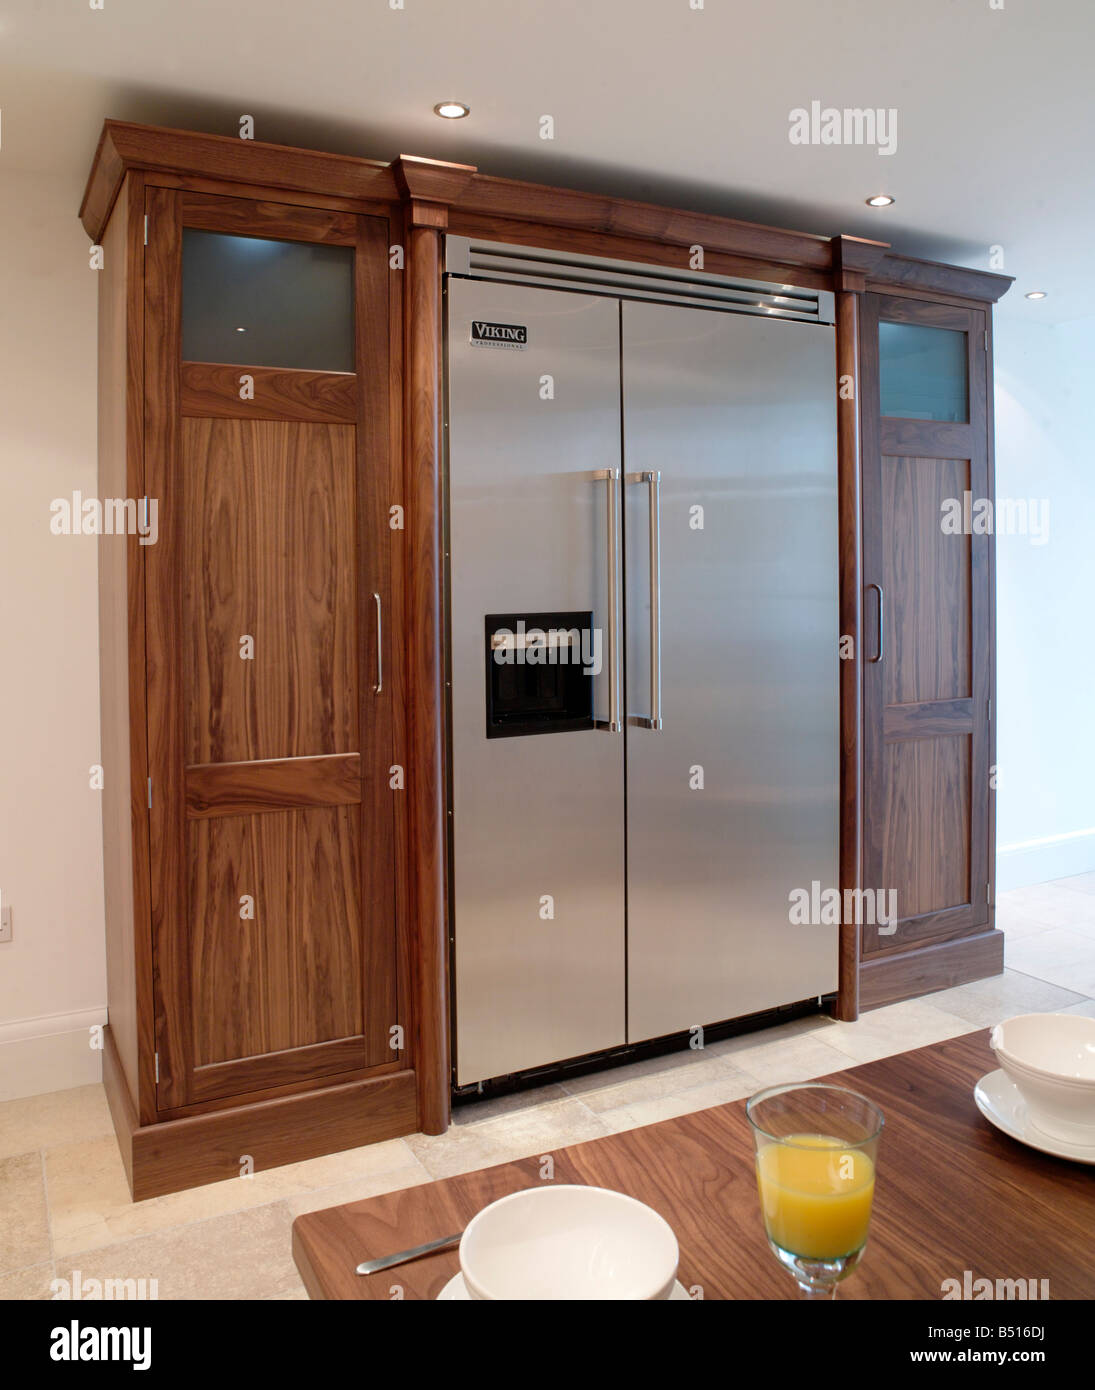 Free standing fridge freezer enclosure with storage and finished in dark wood Stock Photo